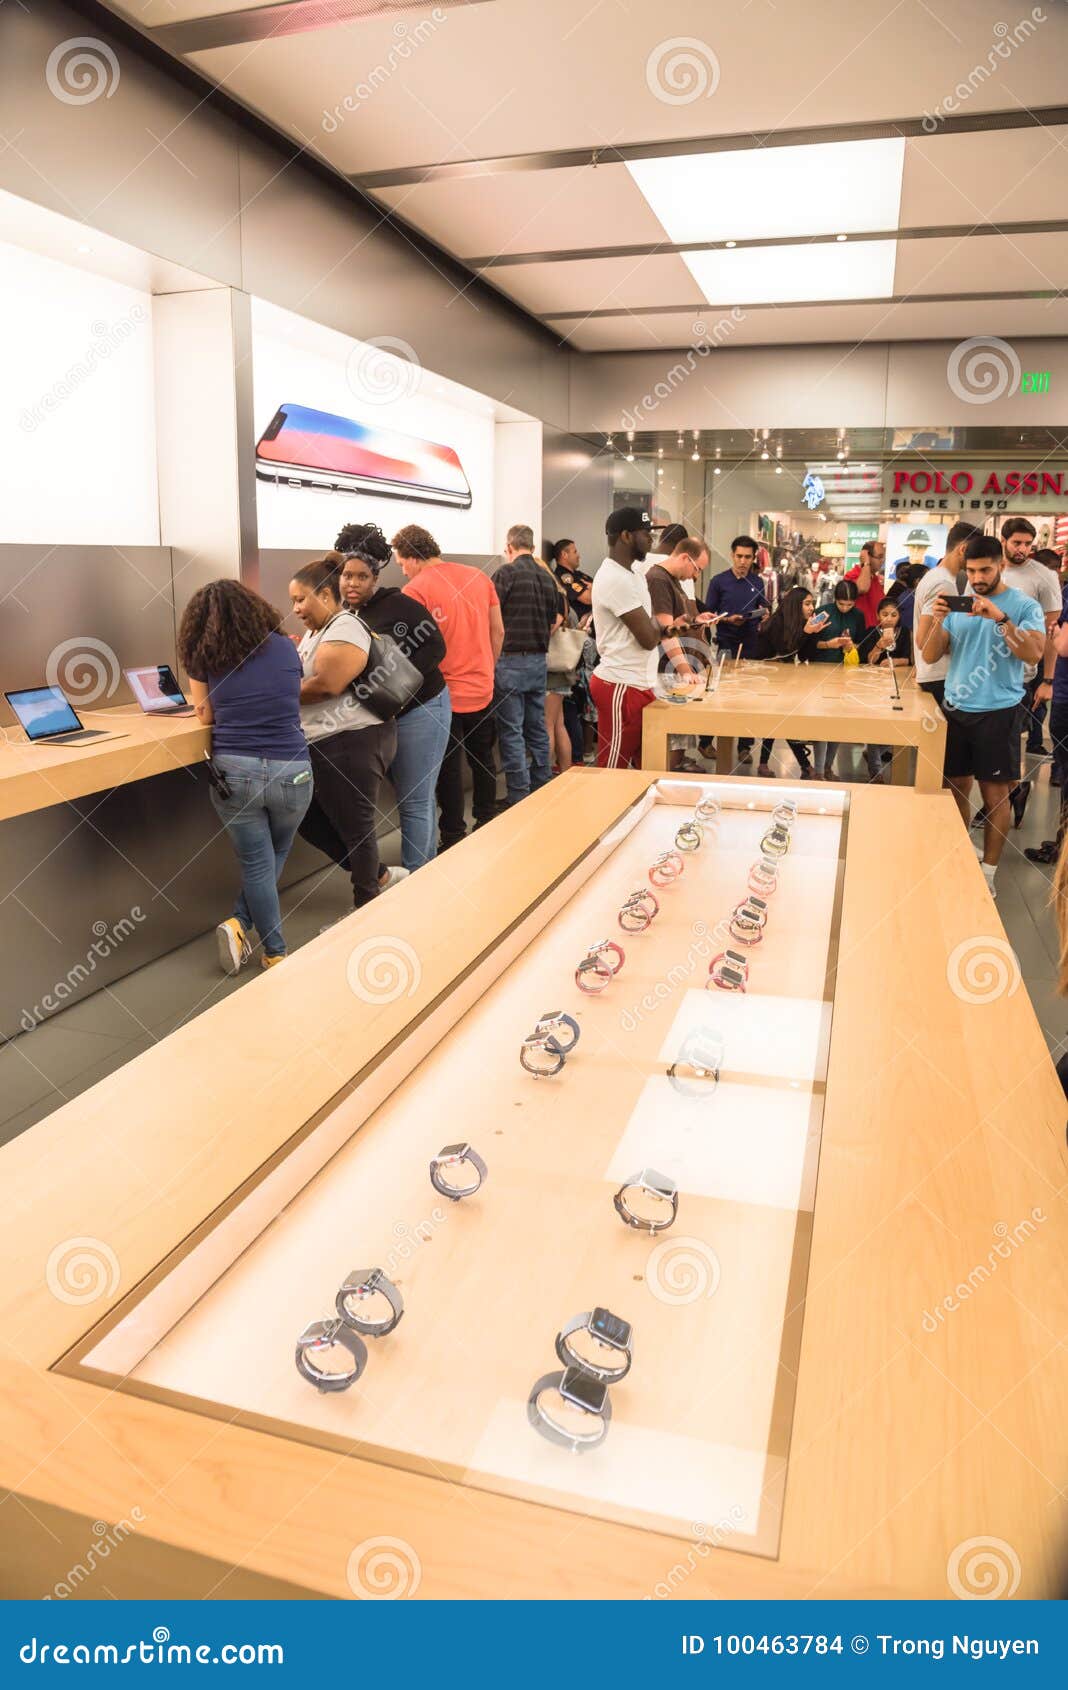 Apple Watch Series 3 At Apple Store Editorial Stock Image ...